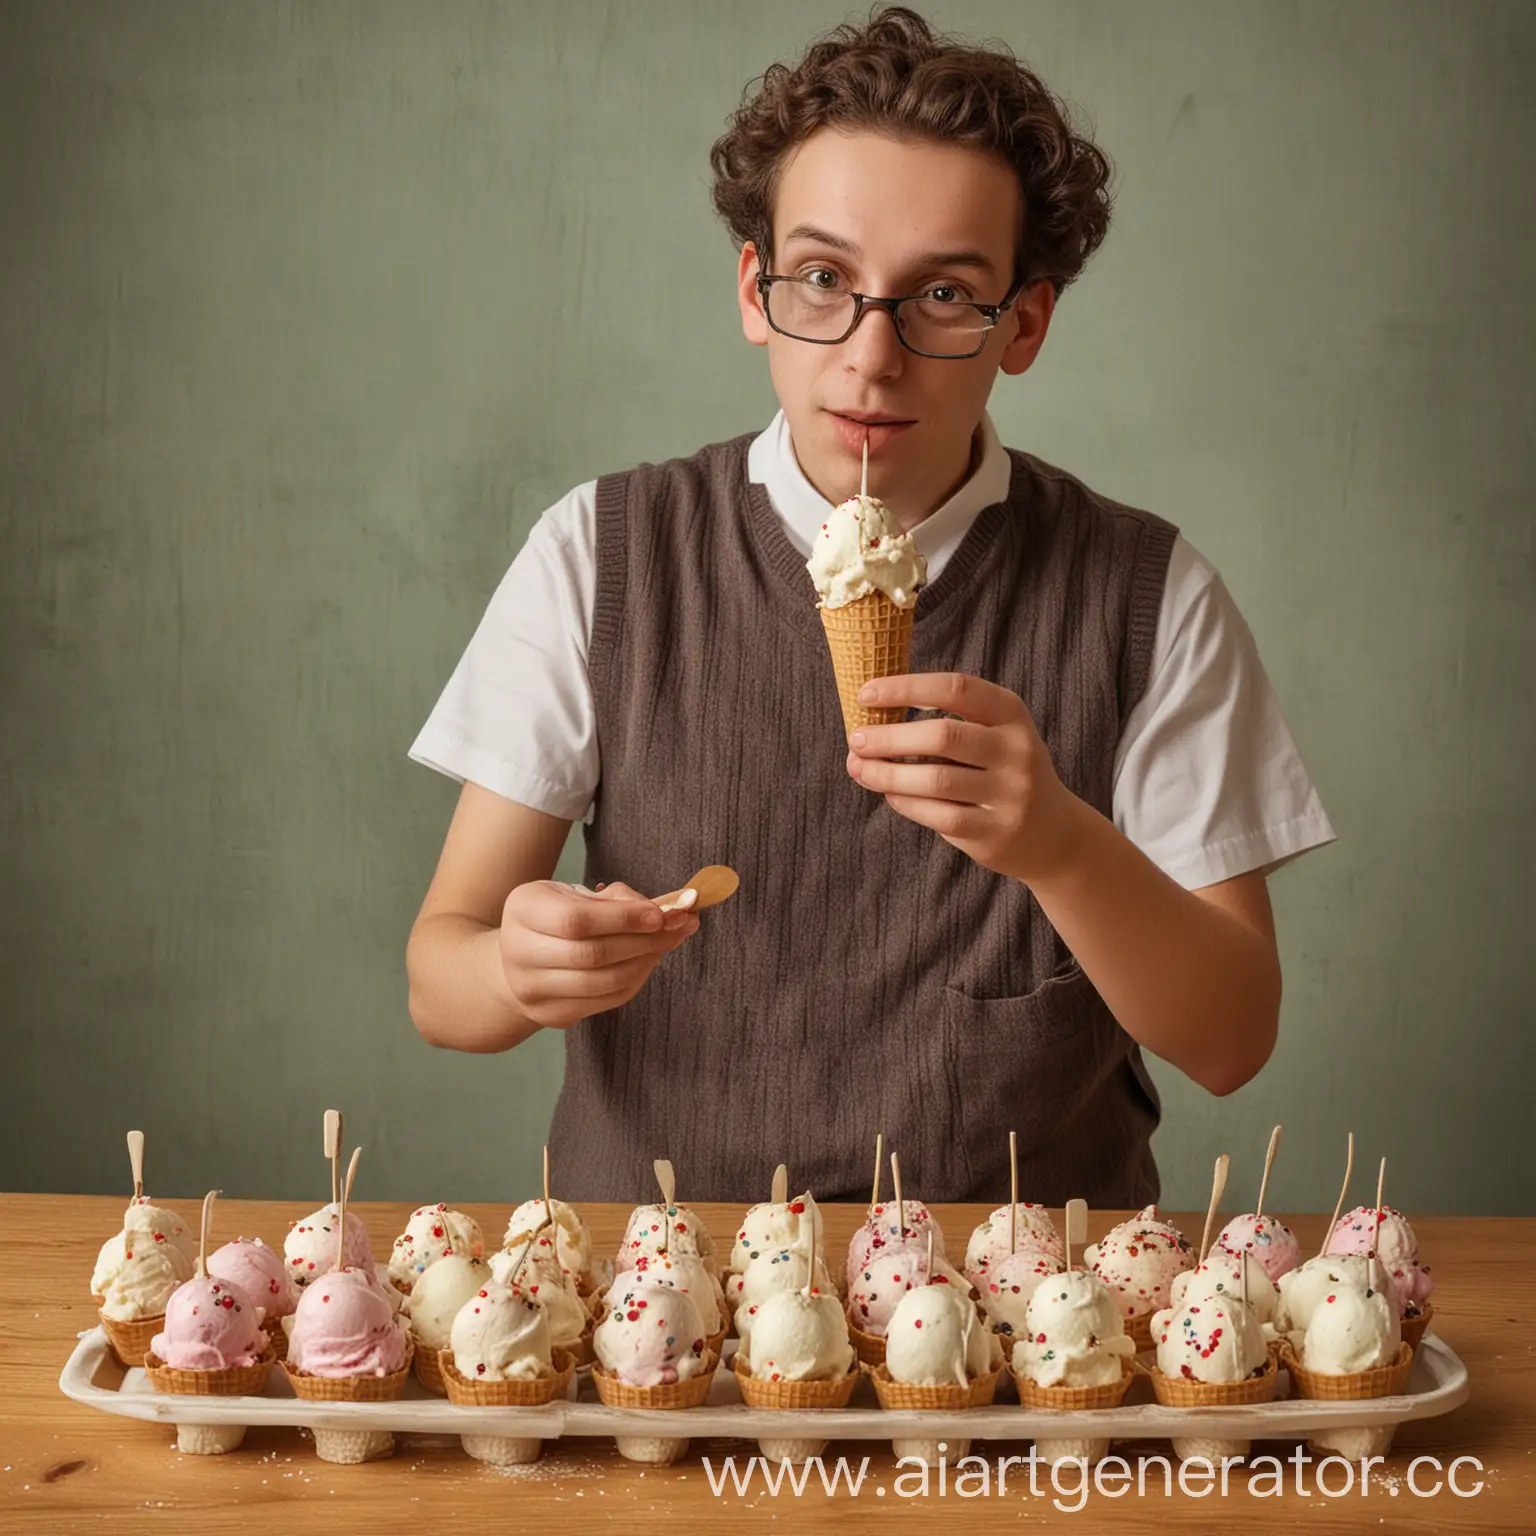 Mathematician-Counting-Ice-Cream-Portions